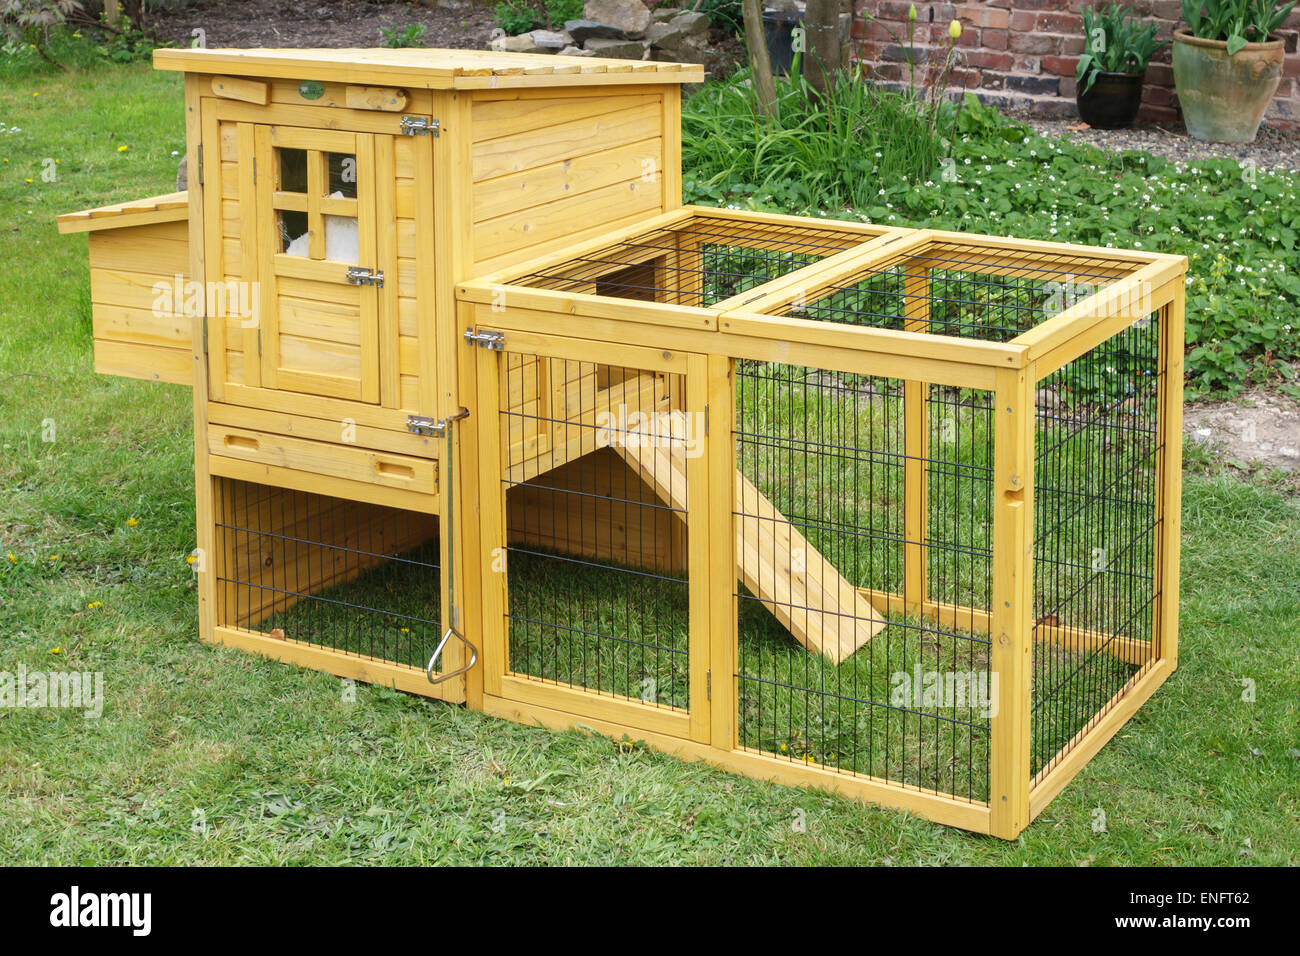 UK. A small wooden hen coop and wire chicken run, suitable for use in a town garden or urban location Stock Photo